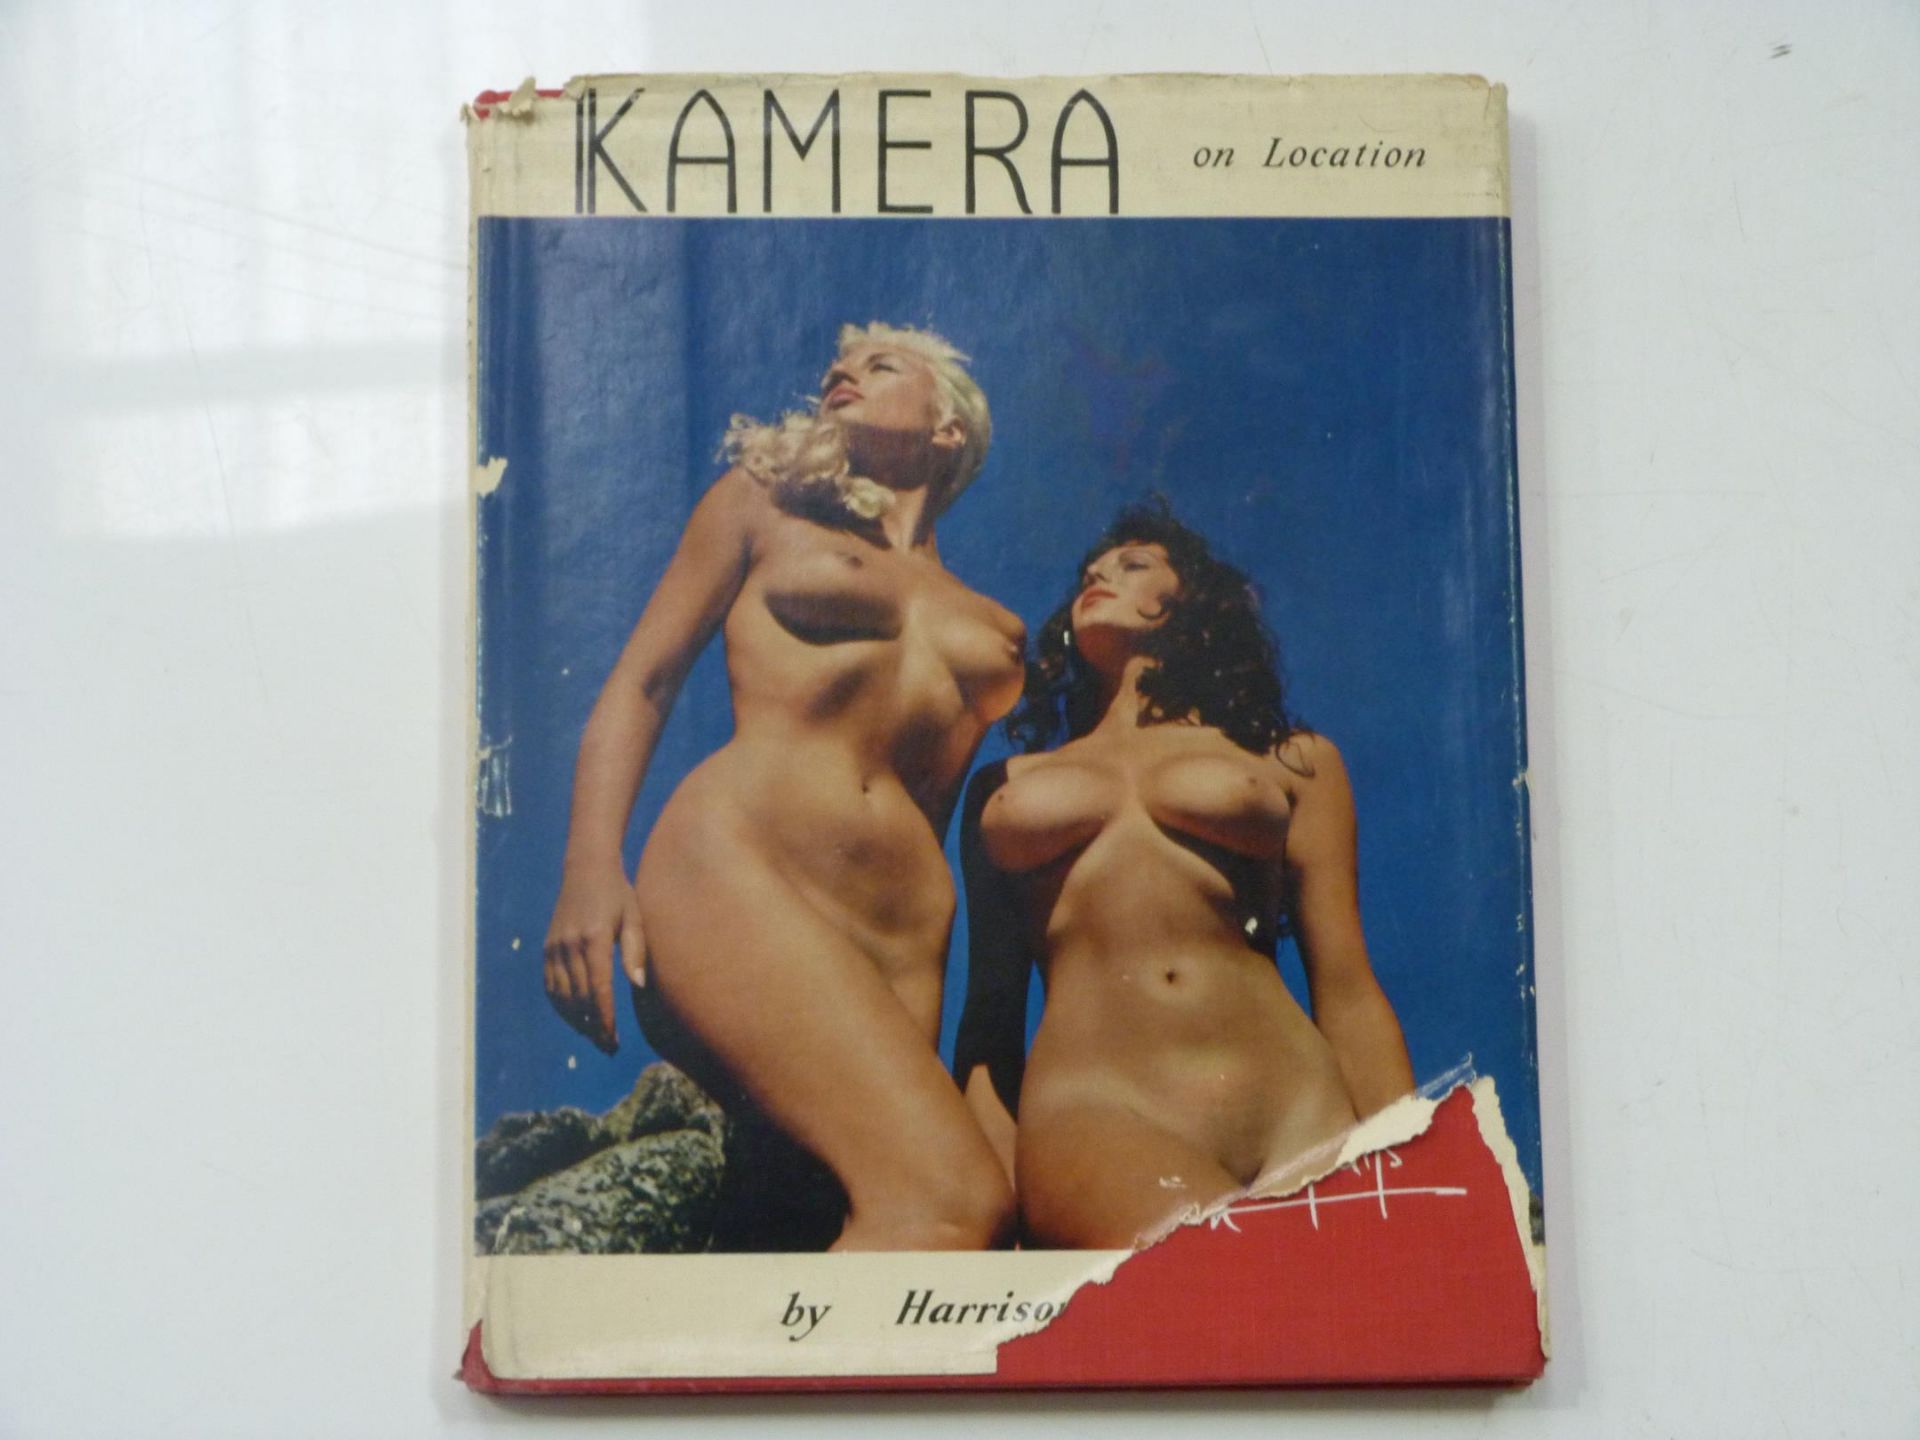 Harrison Marks - 4 various books & 'The Nude' by Andre De Dienes 1956 (est. £30-£50) - Image 6 of 14